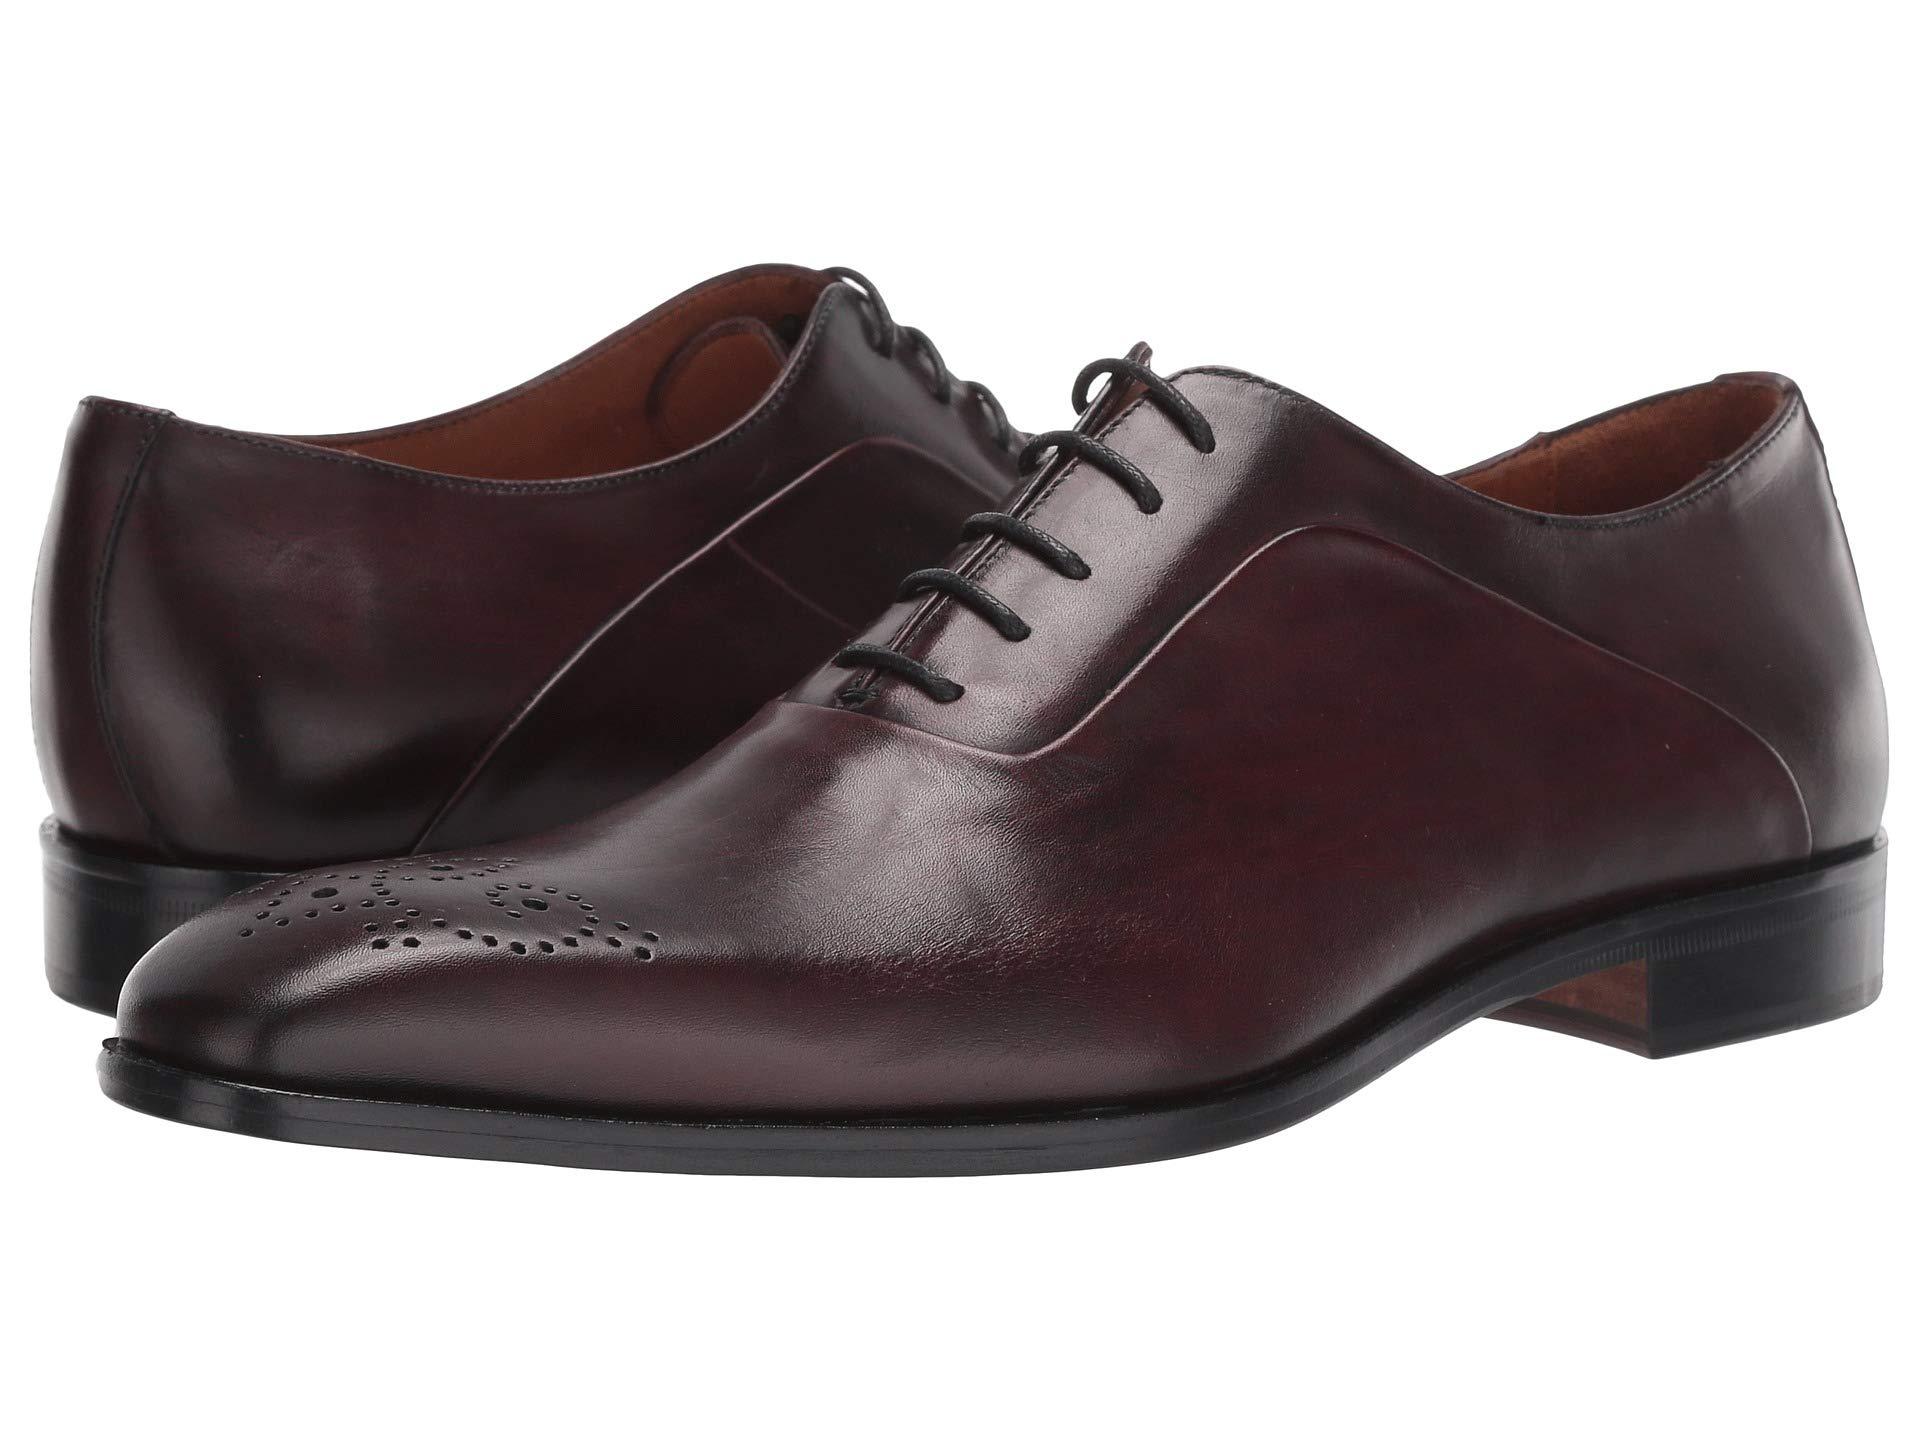 Massimo Matteo Leather Pebbled Bal Ct (chocolate) Lace Up Cap Toe Shoes ...